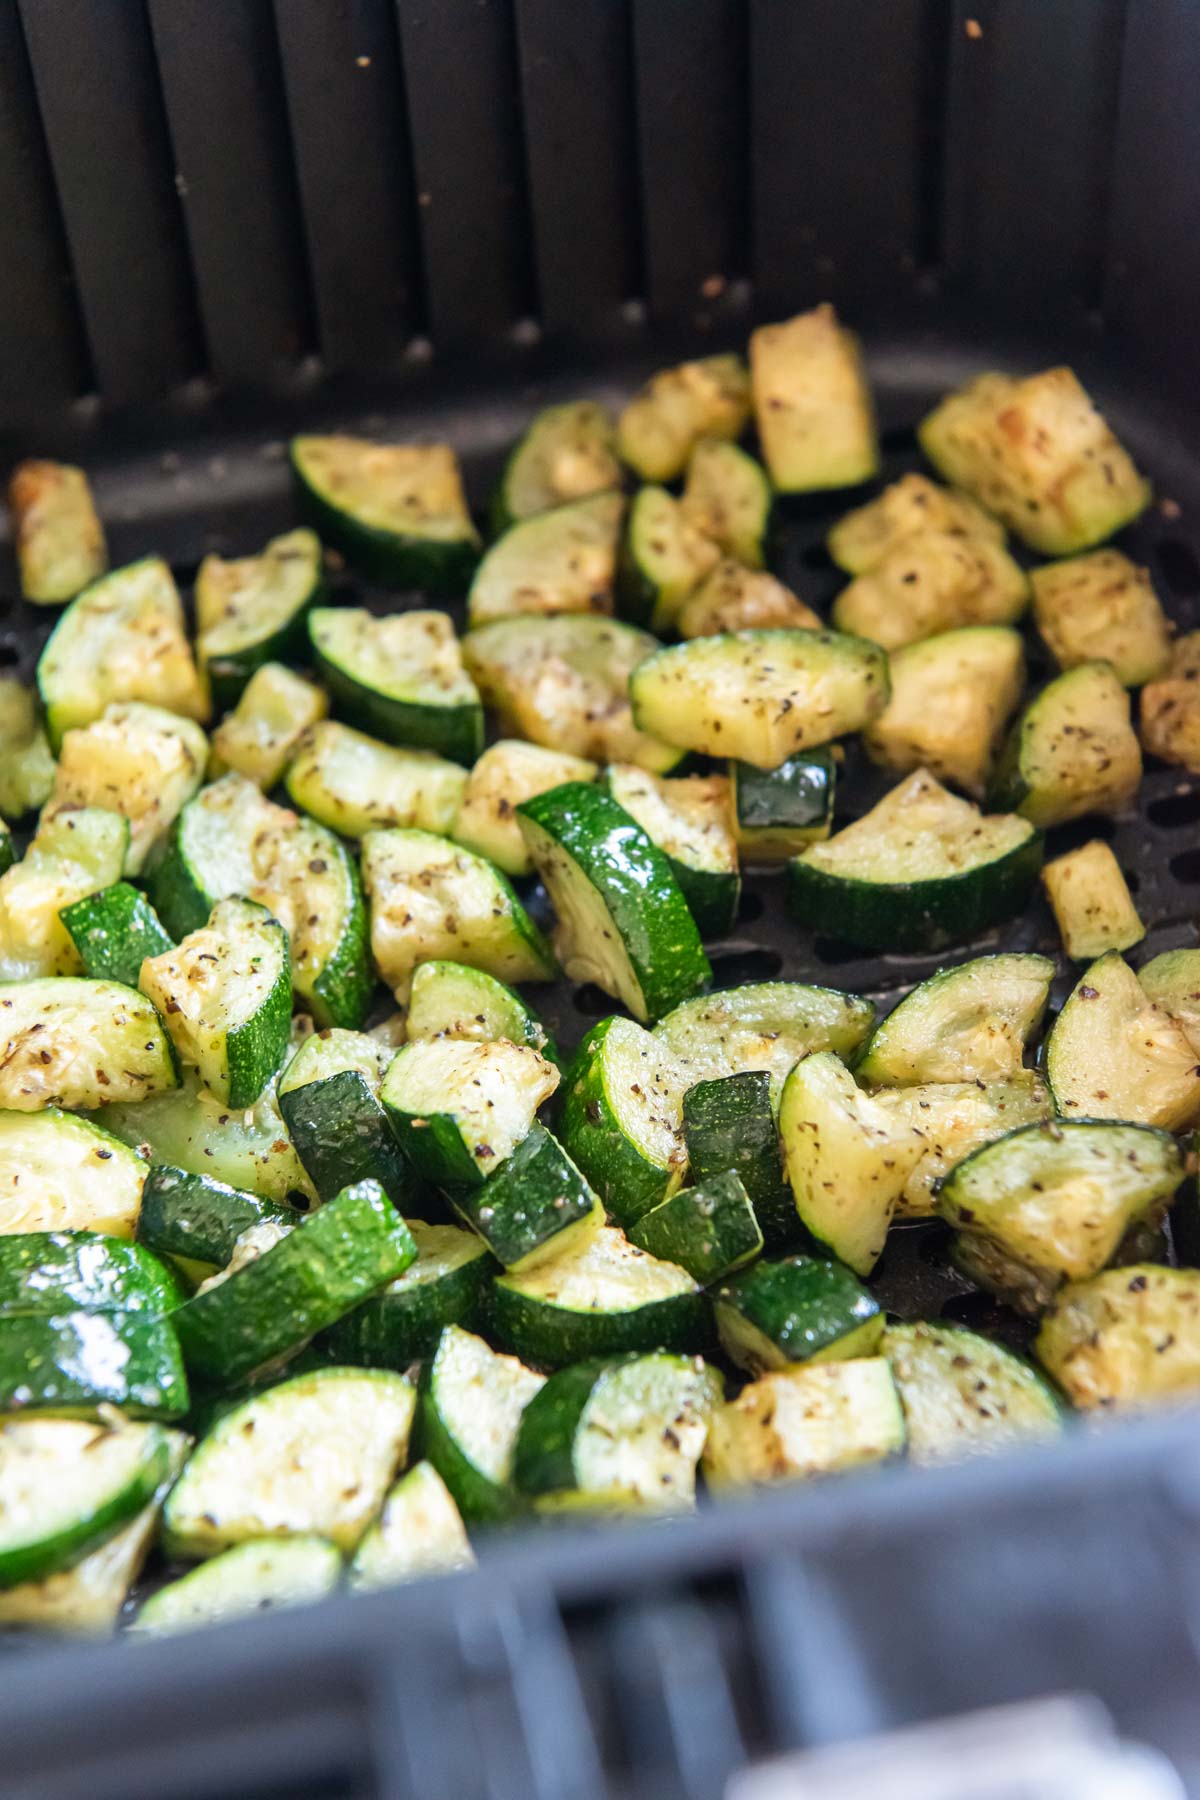 Cooked zucchini pieces in air fryer basket.